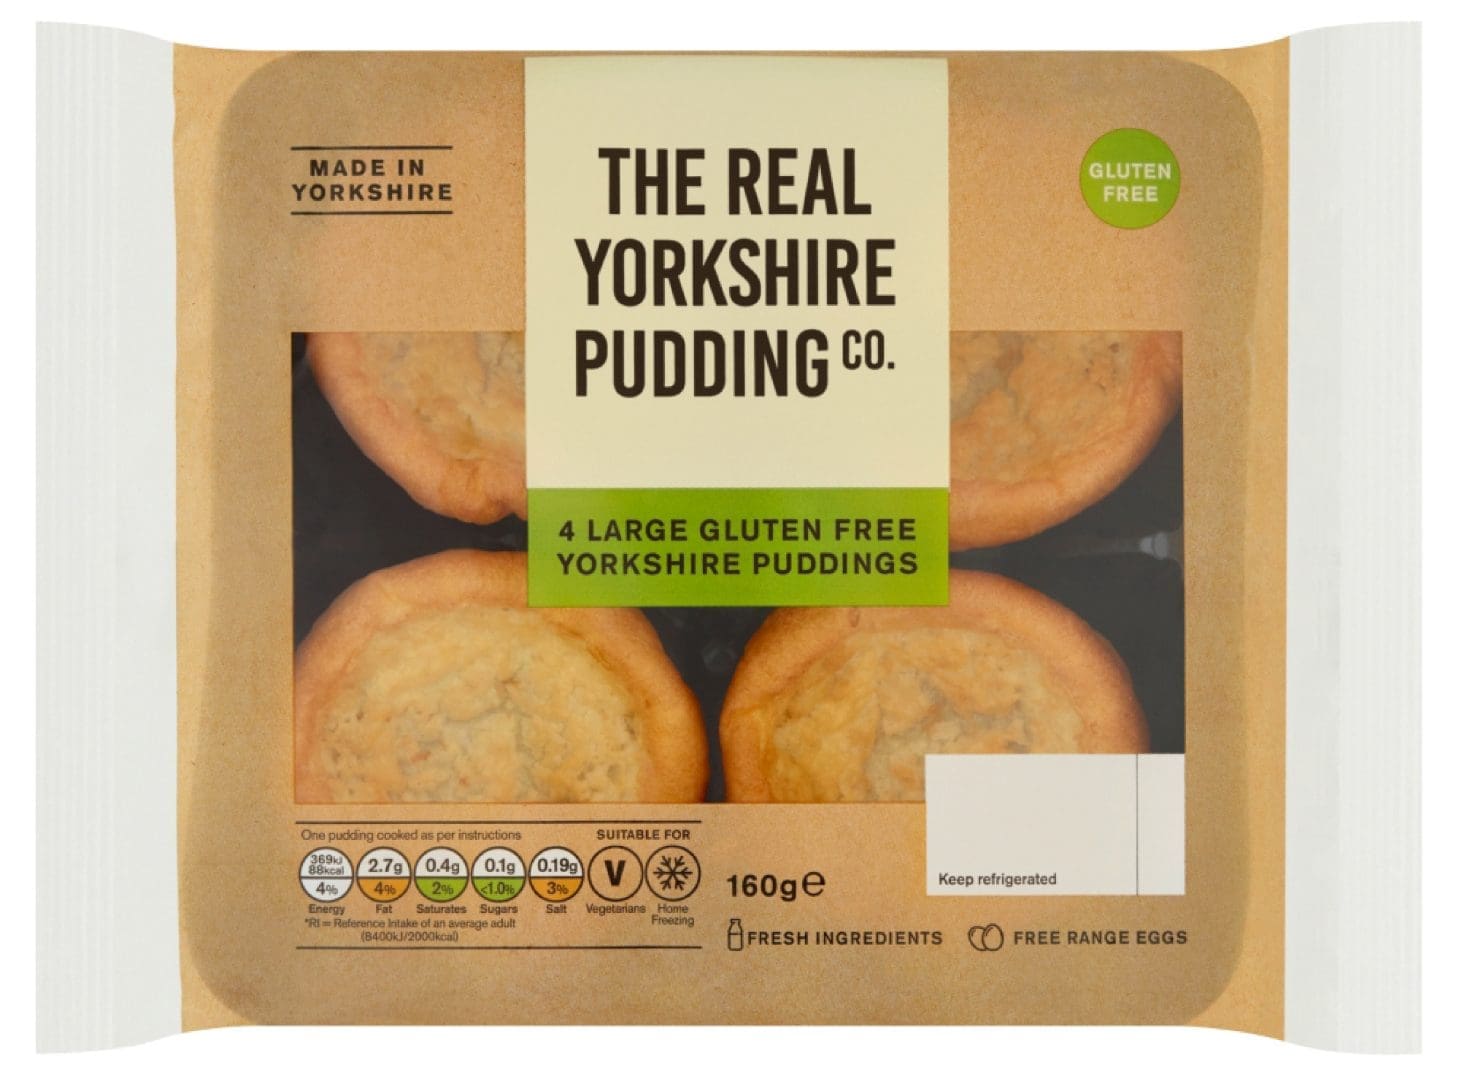 Gluten Free Yorkshire Pudding Packaging